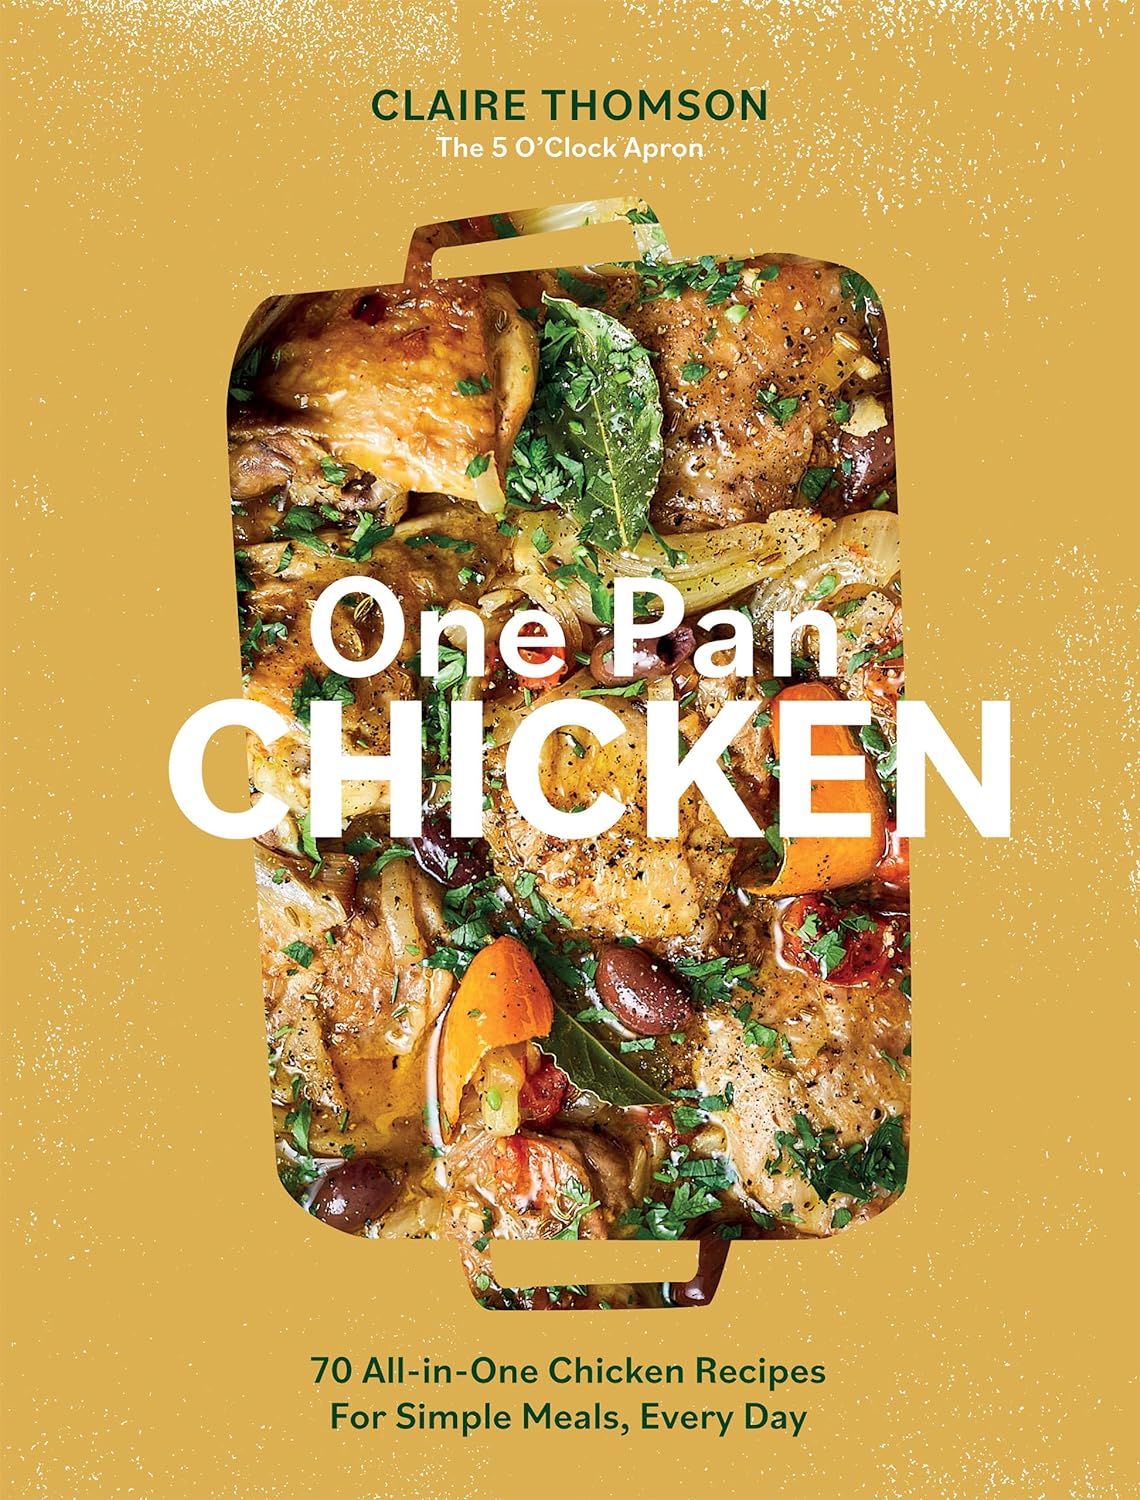 One Pan Chicken: 70 All-in-One Chicken Recipes For Simple Meals, Every Day (Claire Thomson)